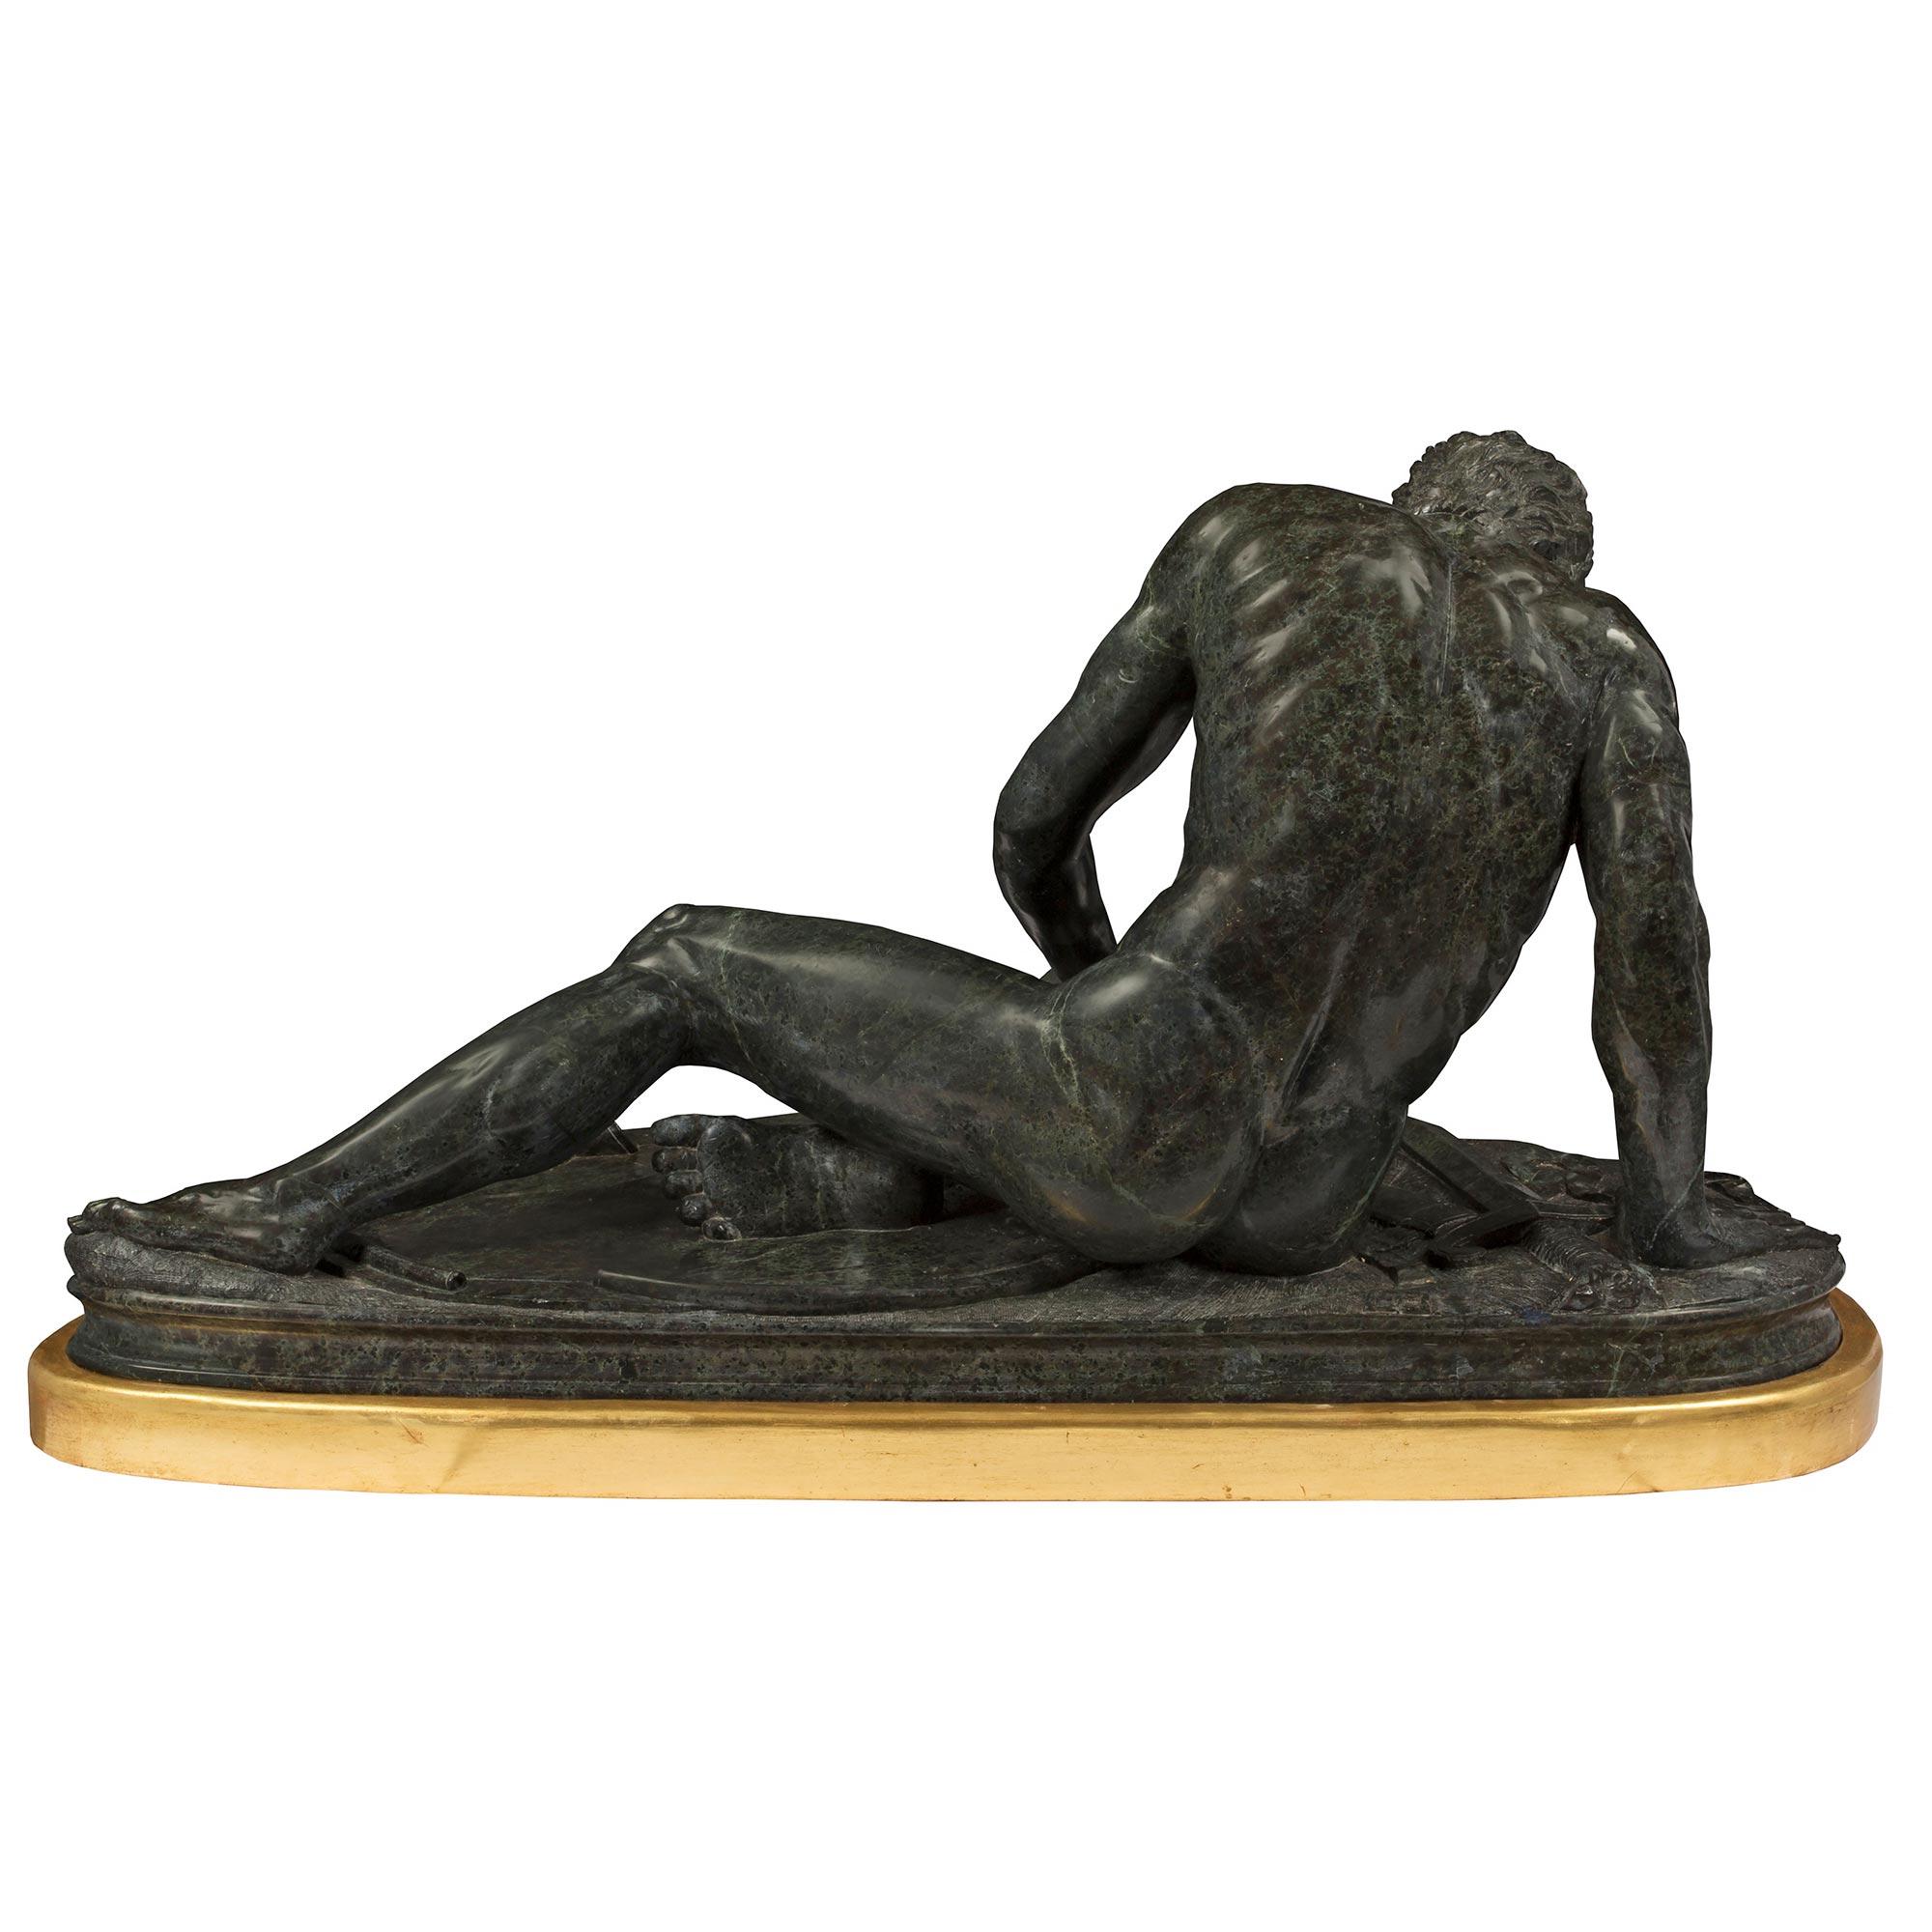 Italian 19th Century Verde Antico Marble and Giltwood Statue of The Dying Gaul For Sale 1